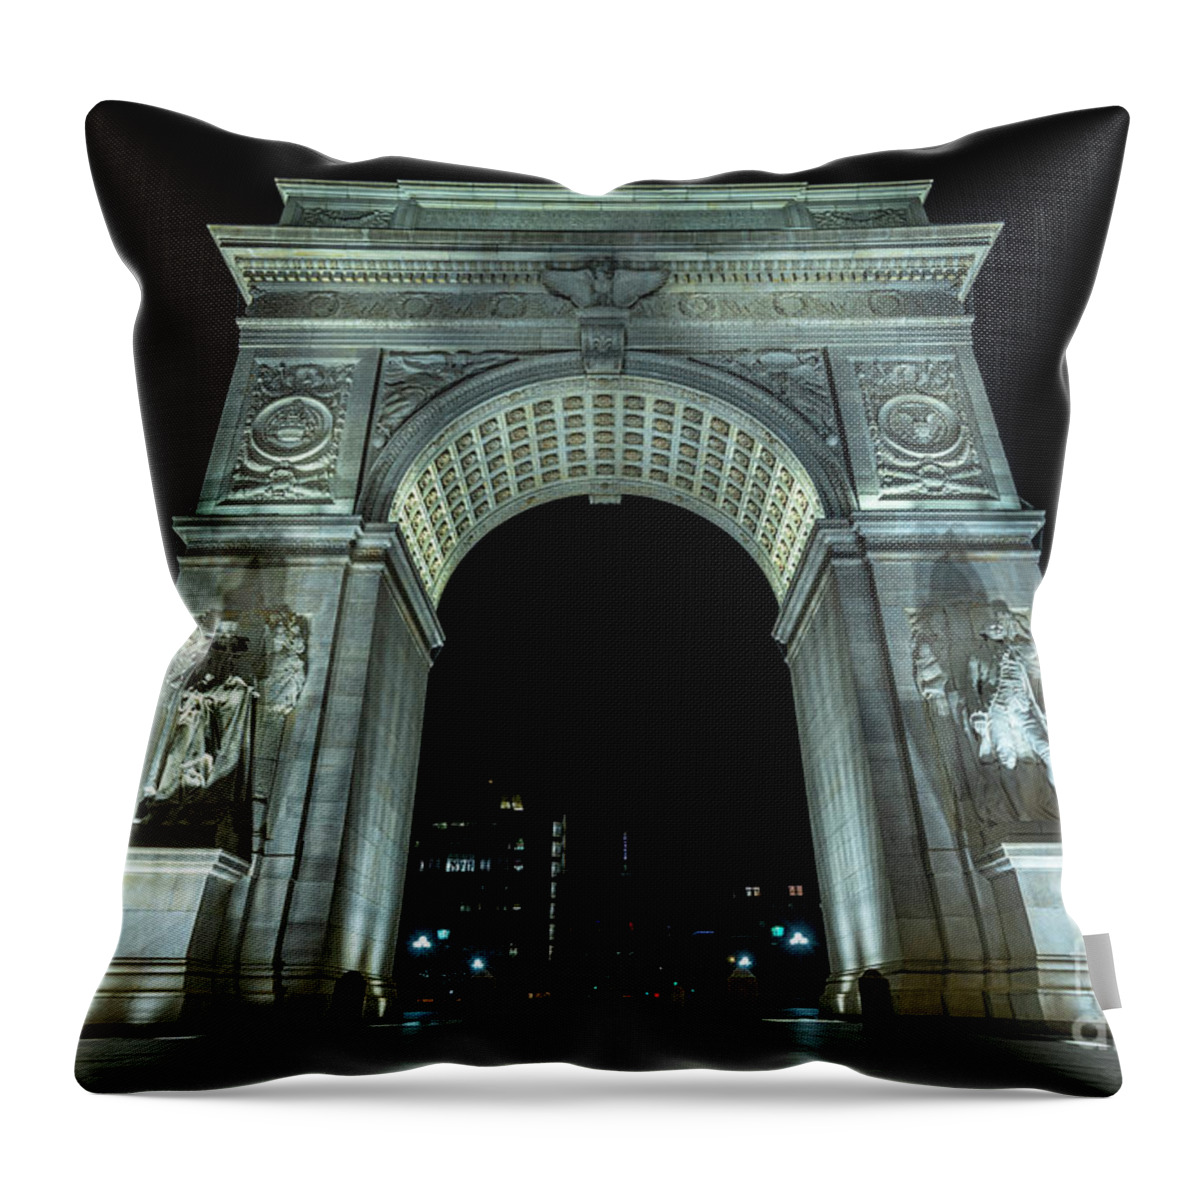 1892 Throw Pillow featuring the photograph Washington Square Arch The North Face by Stef Ko